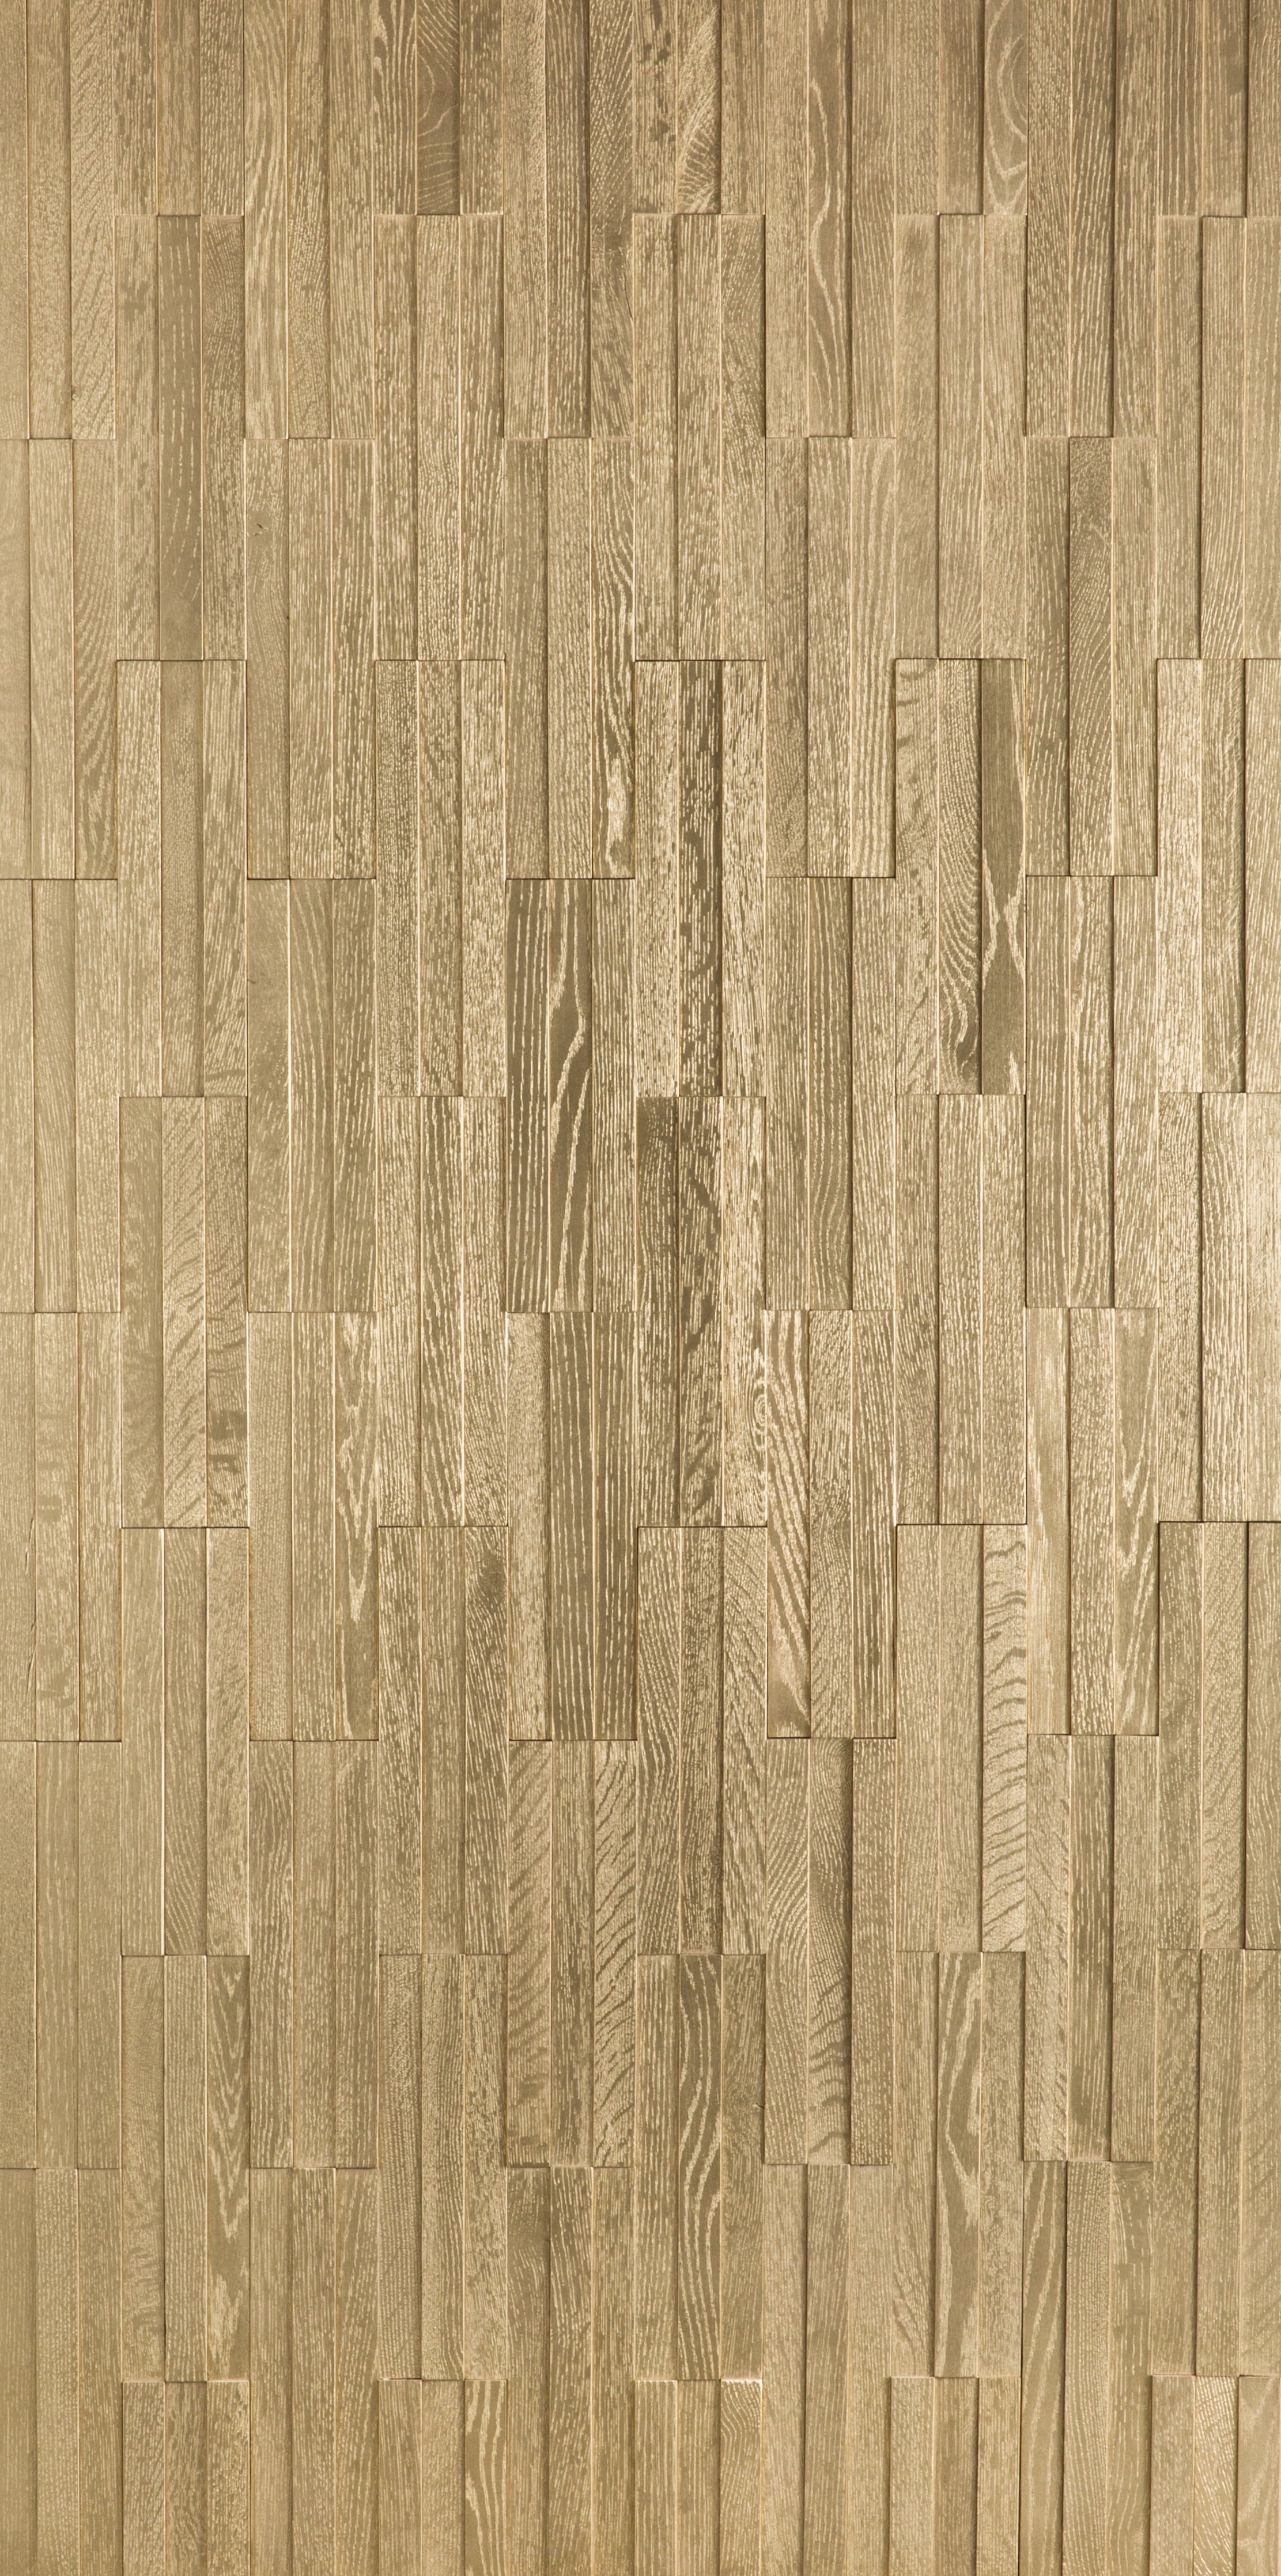 duchateau inceptiv kuadra gold oak three dimensional wall natural wood panel lacquer for interior use distributed by surface group international